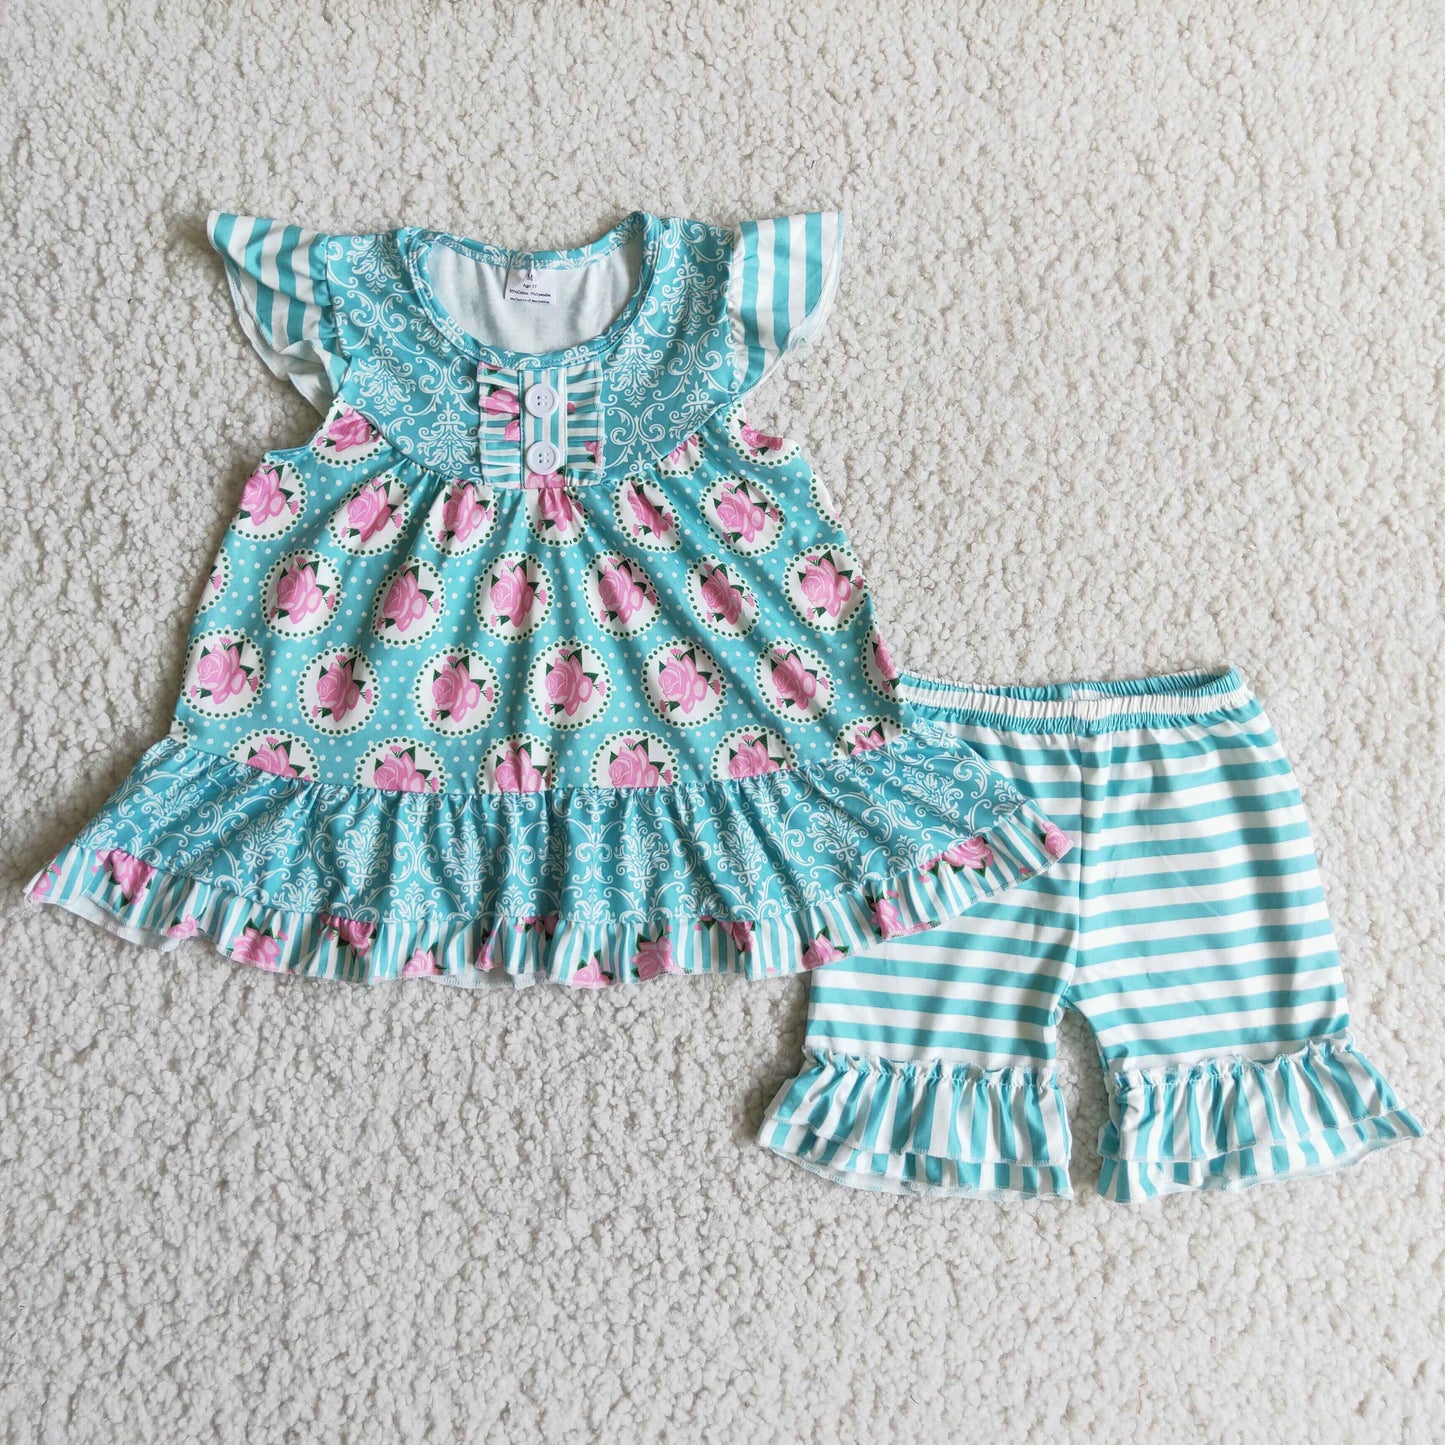 B9-10 Baby Girl Summer Flower Ruffle Shorts Outfit